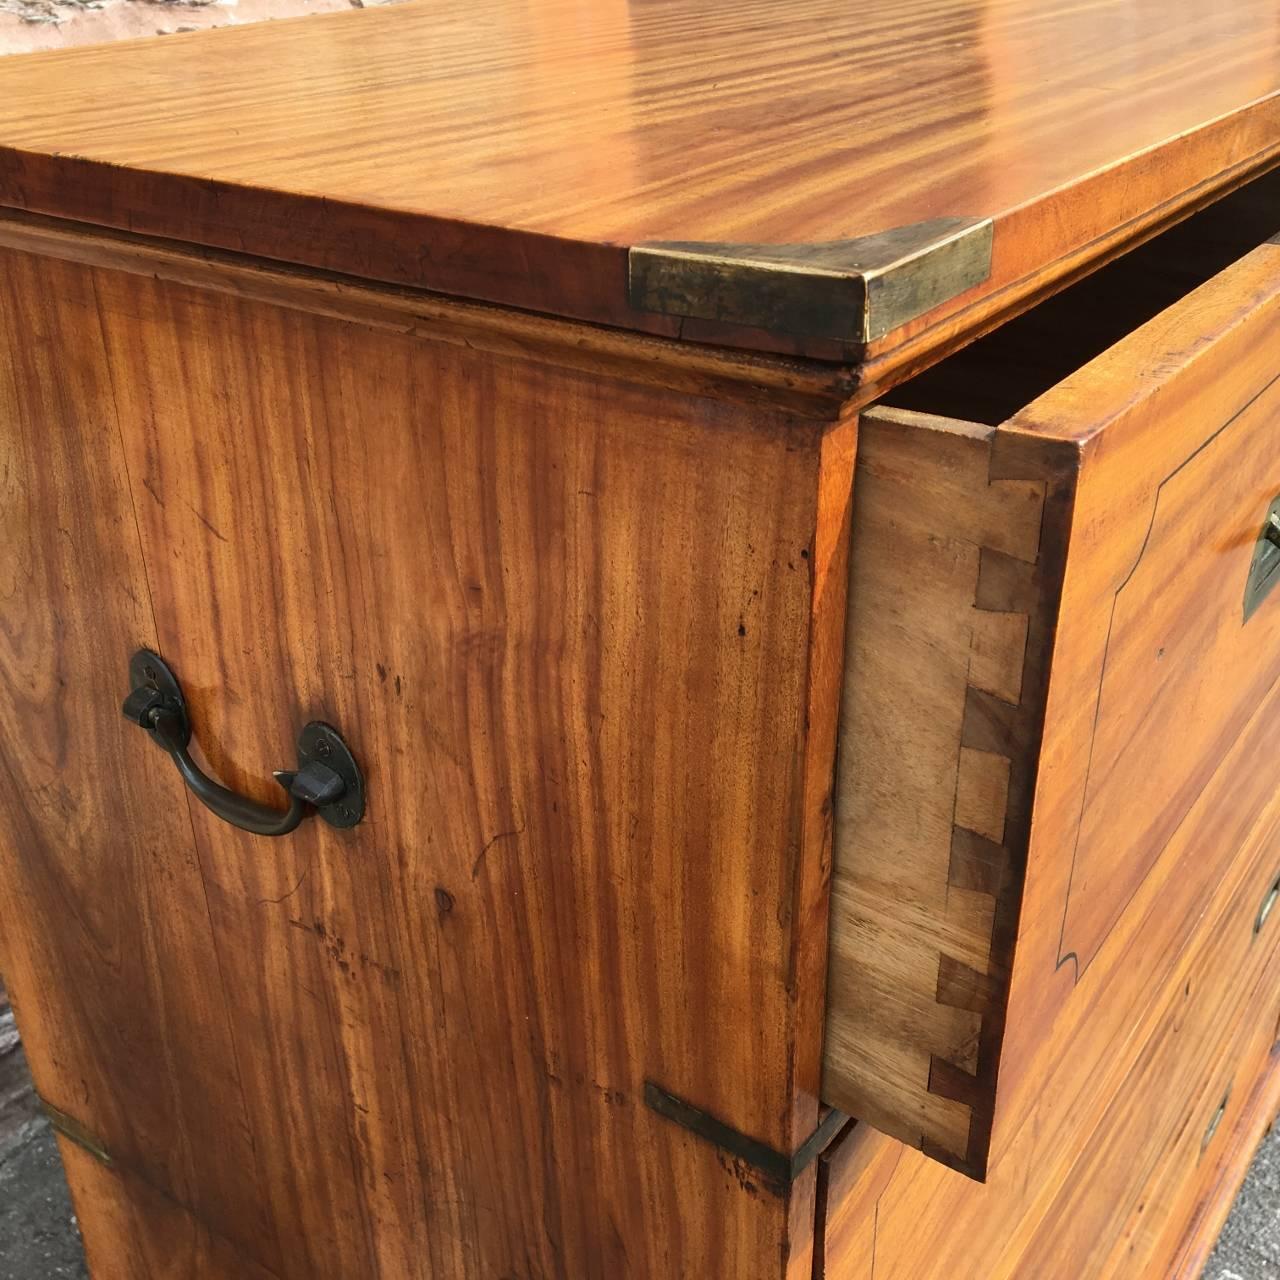 Hand-Crafted Mid-19th Century Camphor Wood Chest of Drawers For Sale